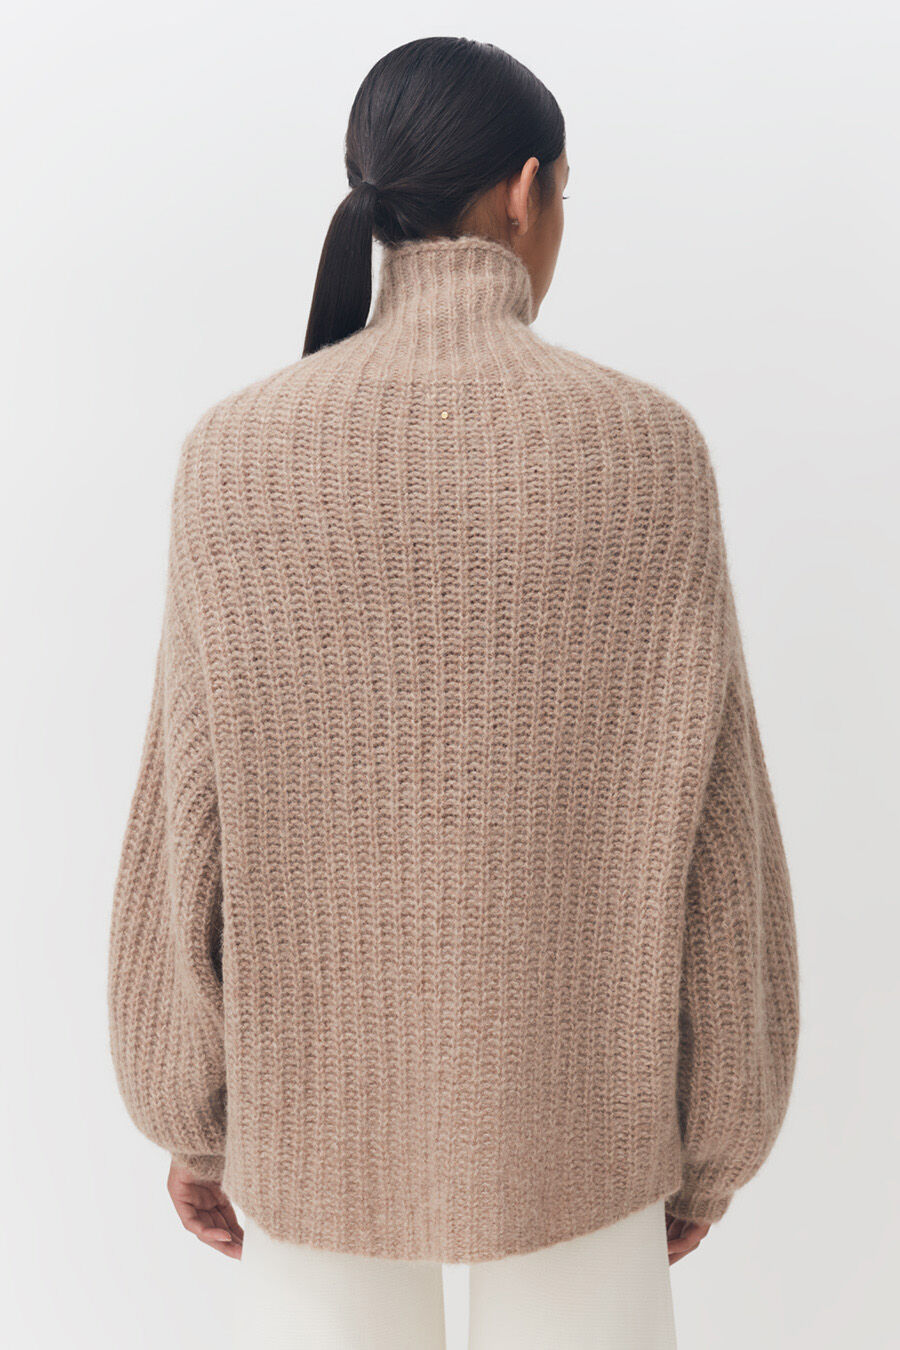 Woman in a sweater viewed from the back with hair in a ponytail.